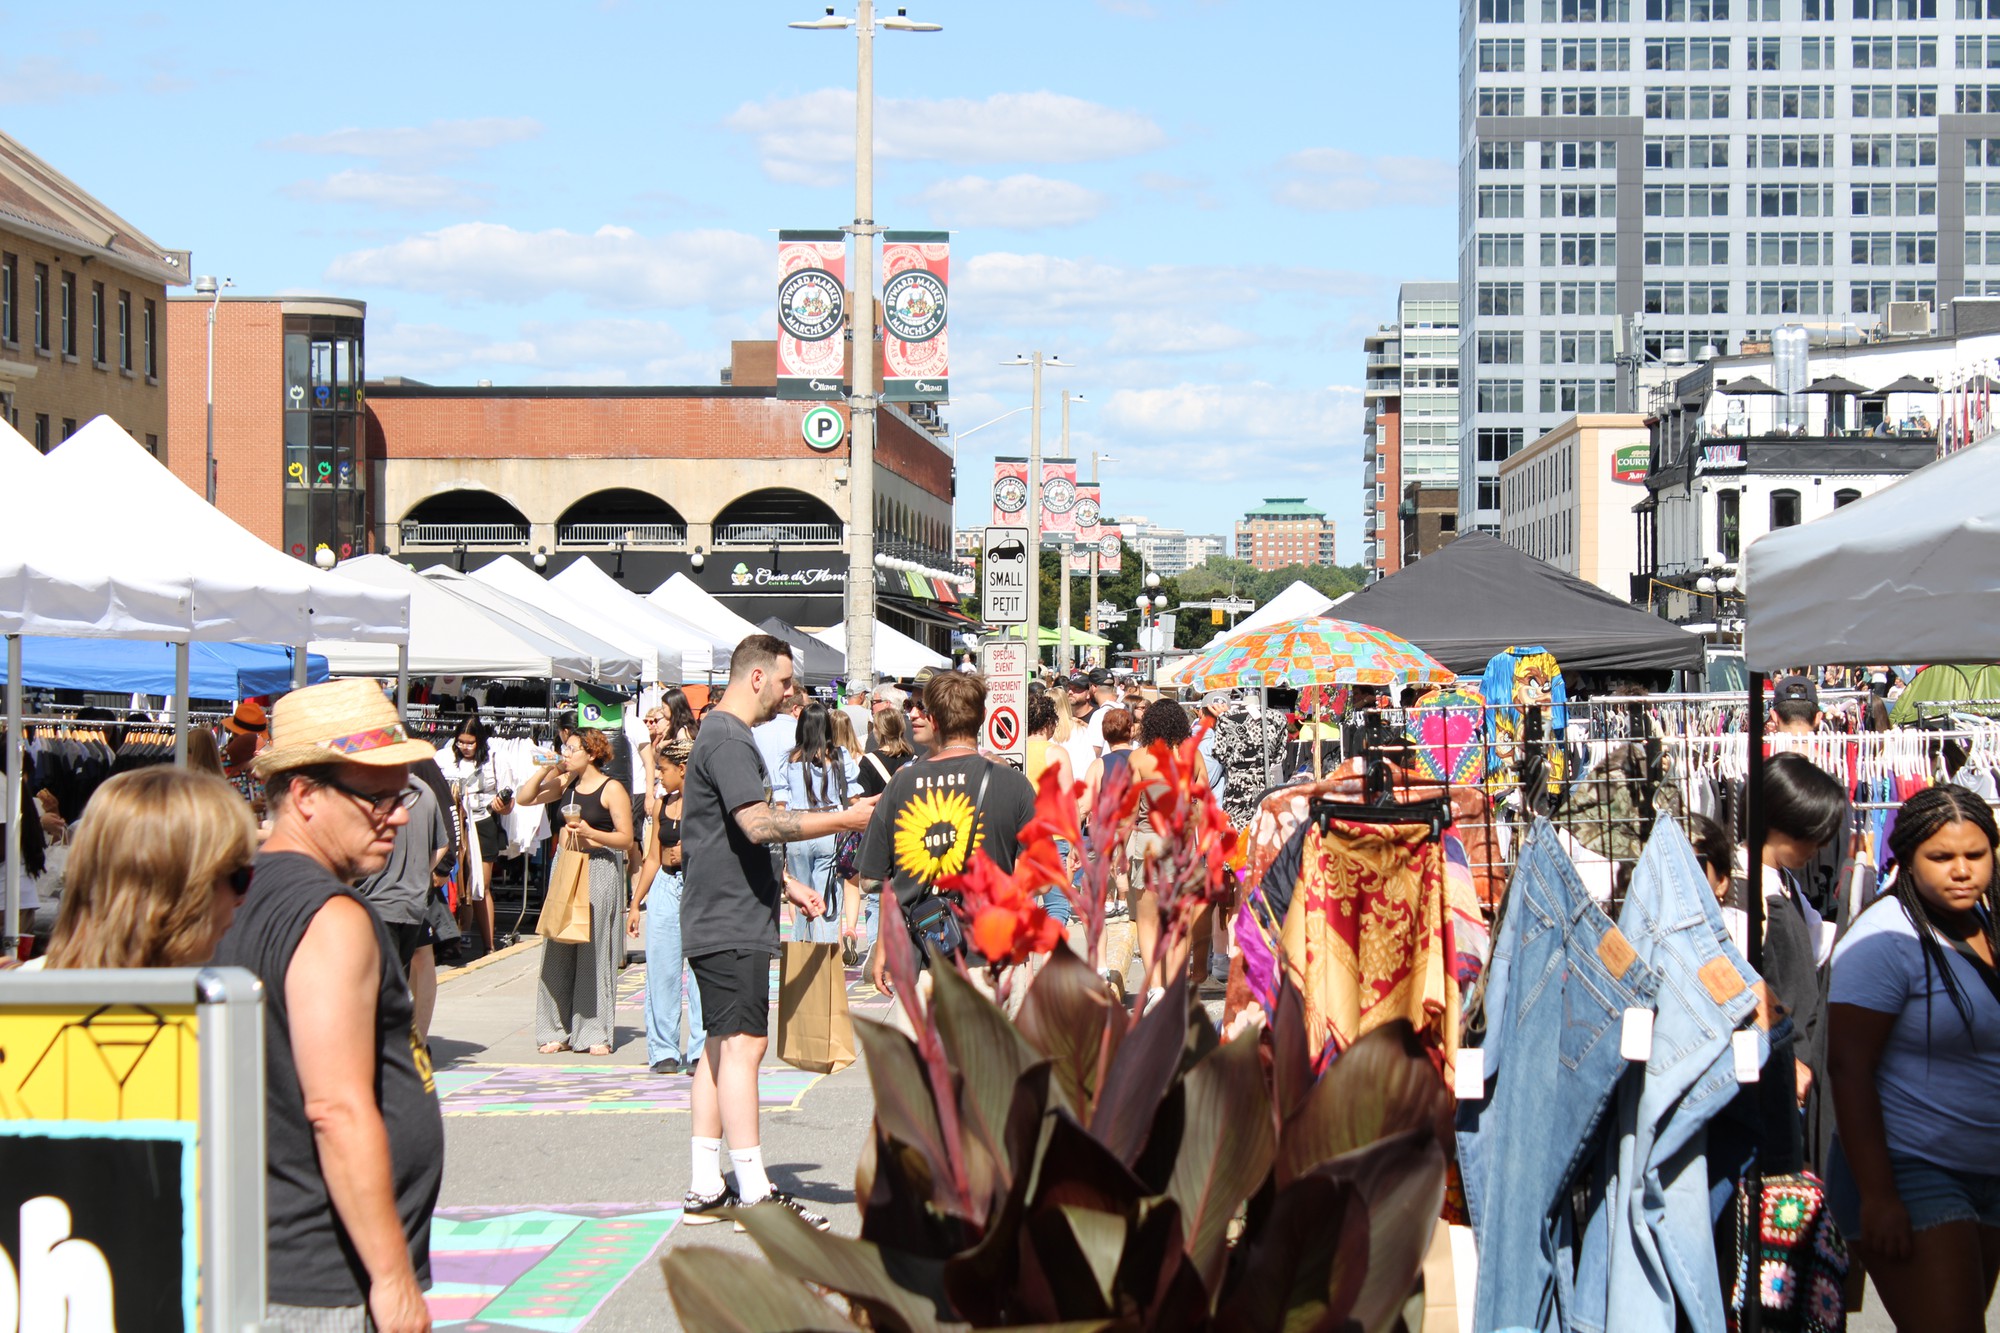 People enjoying the Ooh Festival on York St. in the ByWard Market.